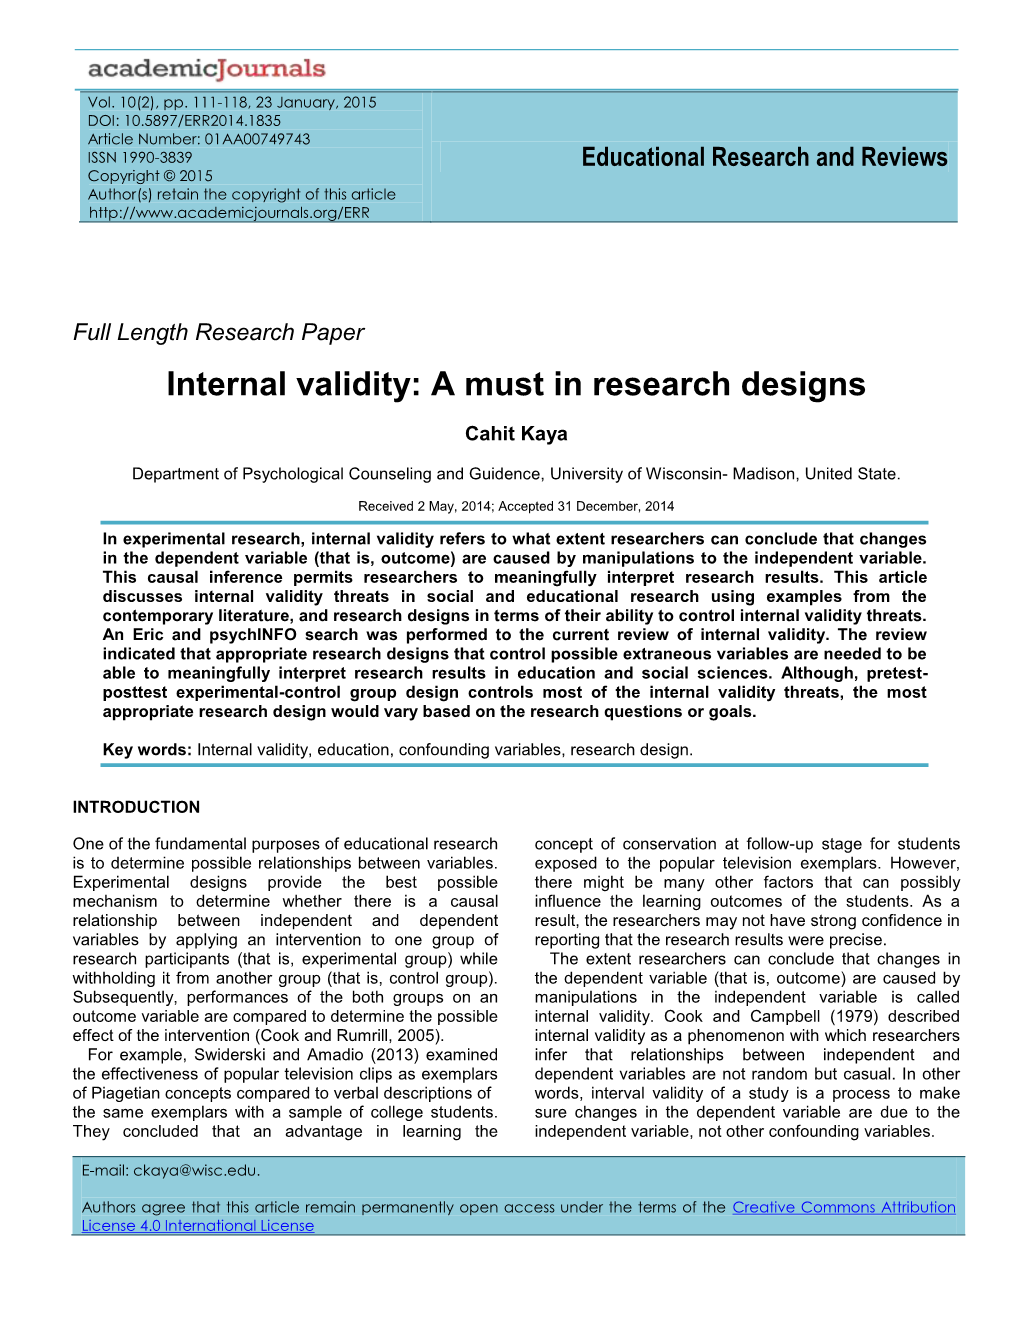 internal validity in research pdf